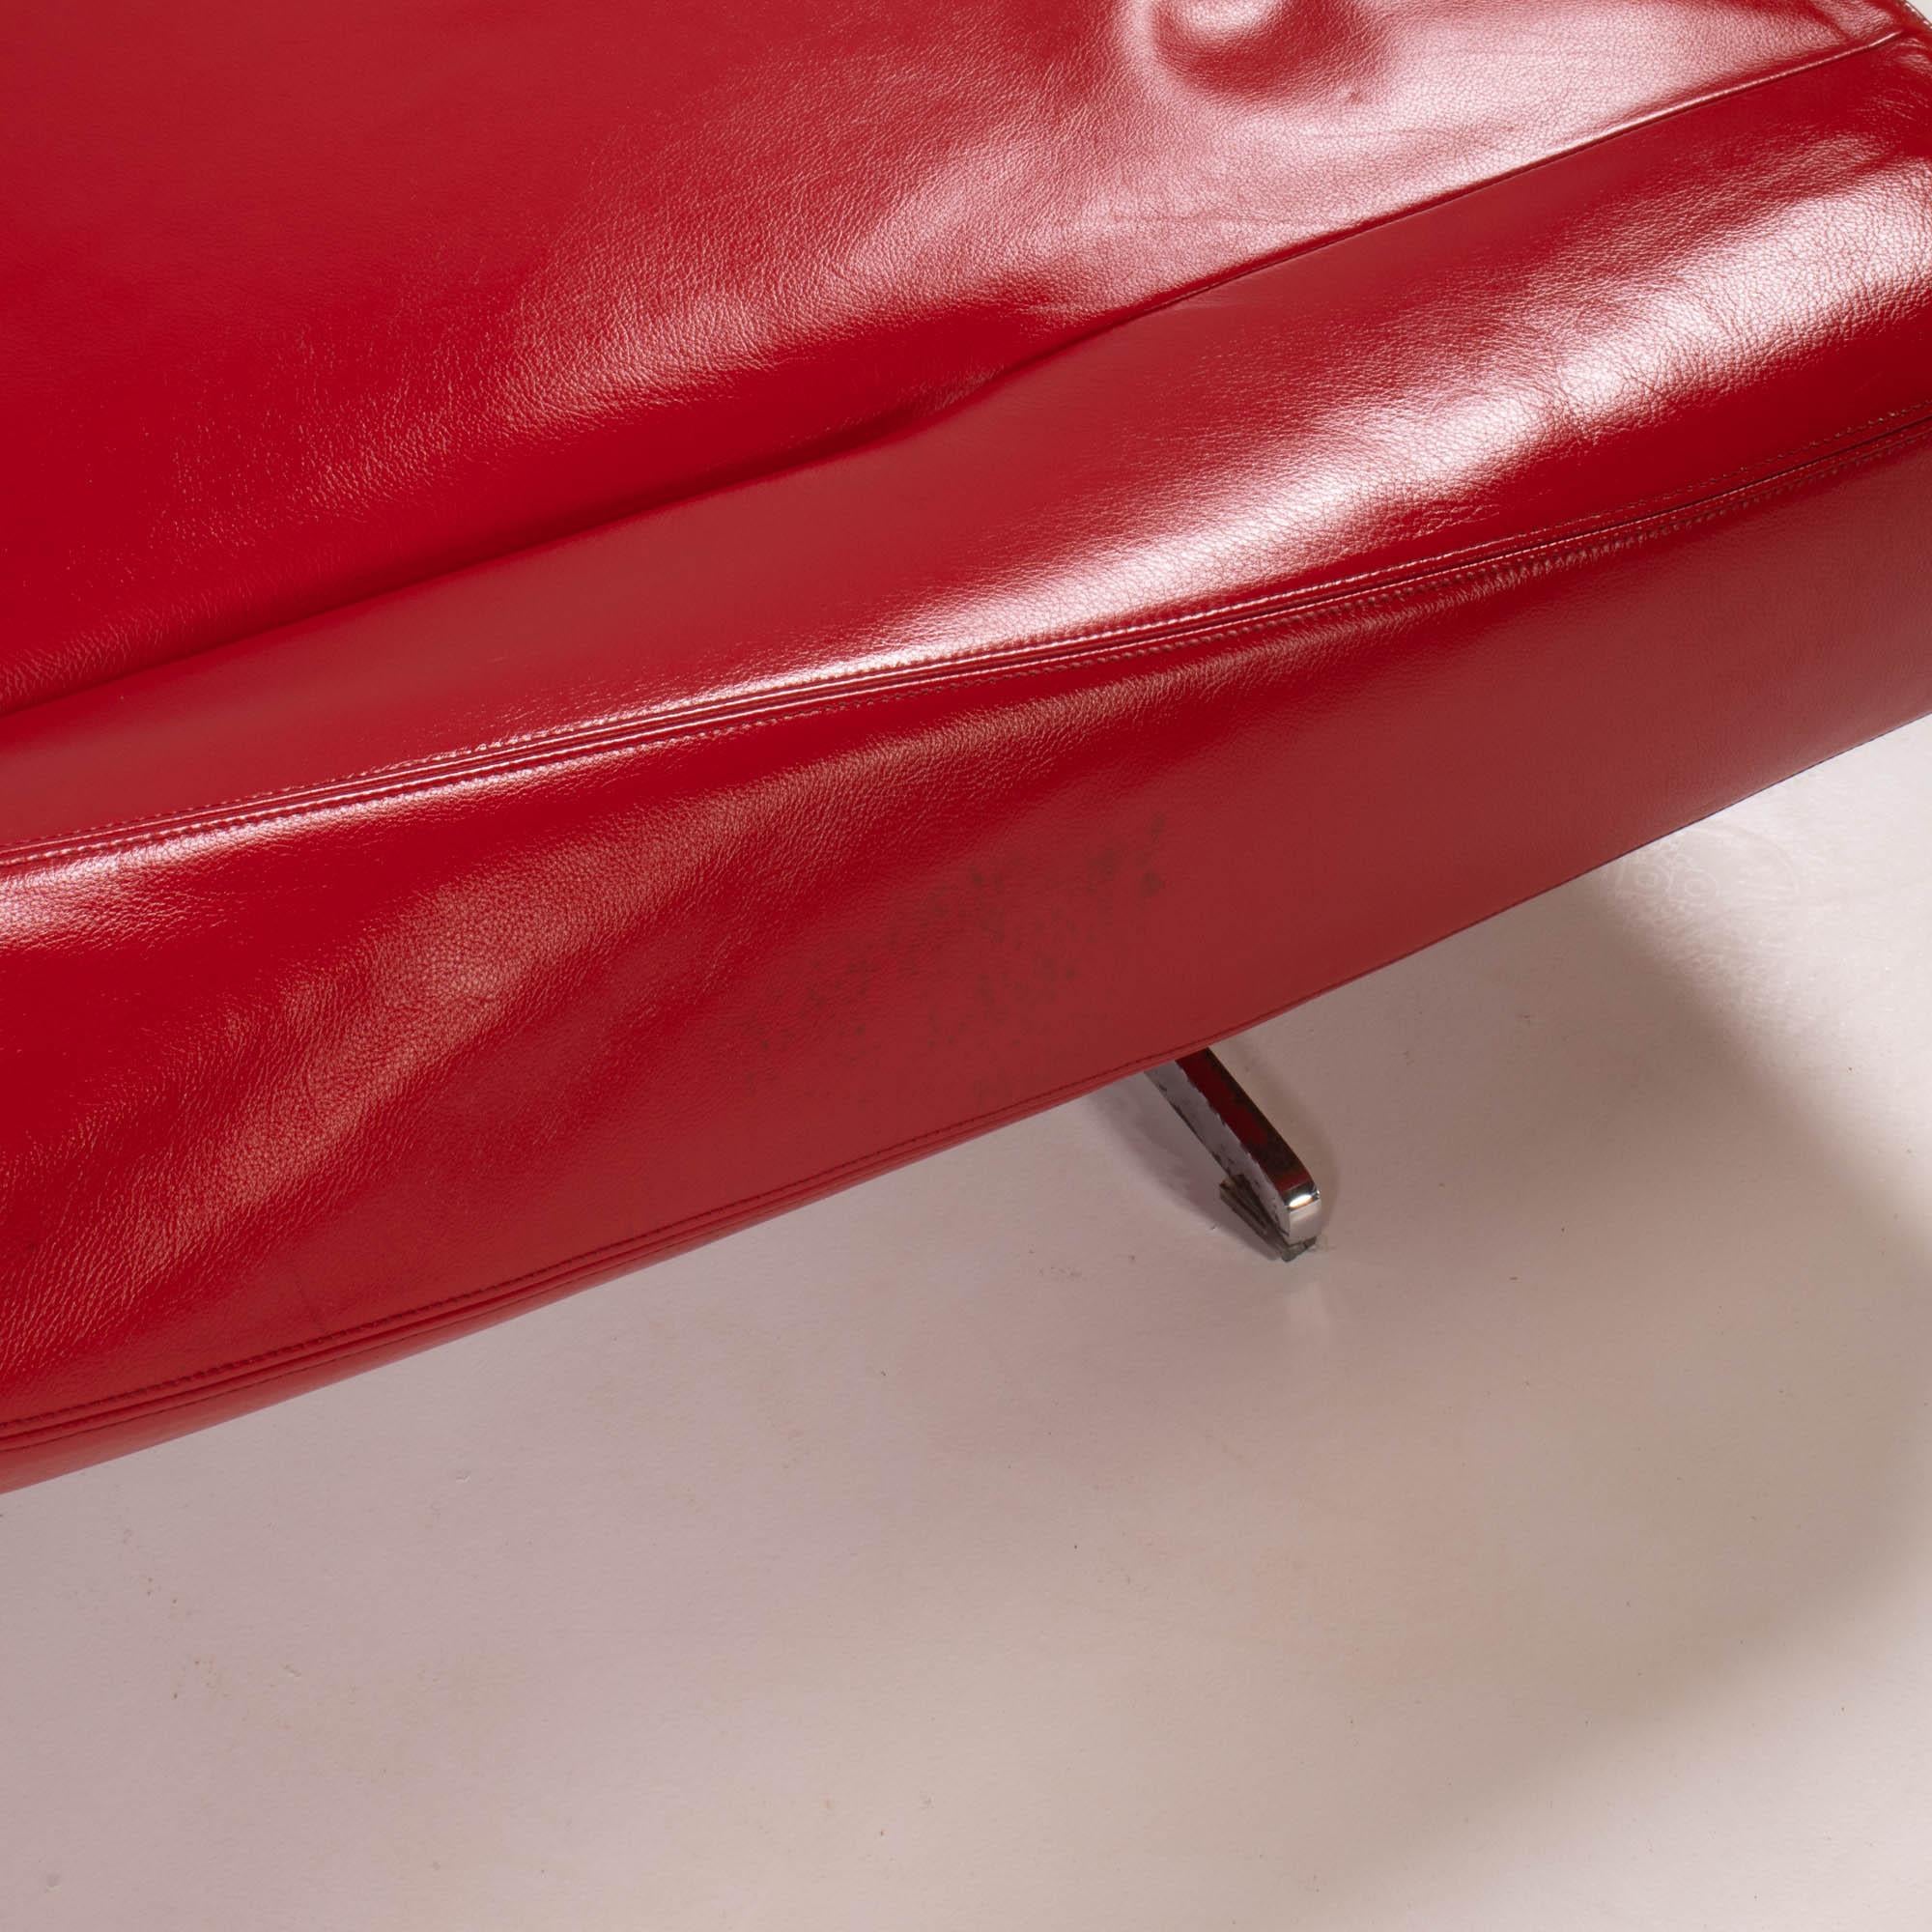 Contemporary Cassina Asped Red Leather Sofa Byjean-Marie Massaud, 2005